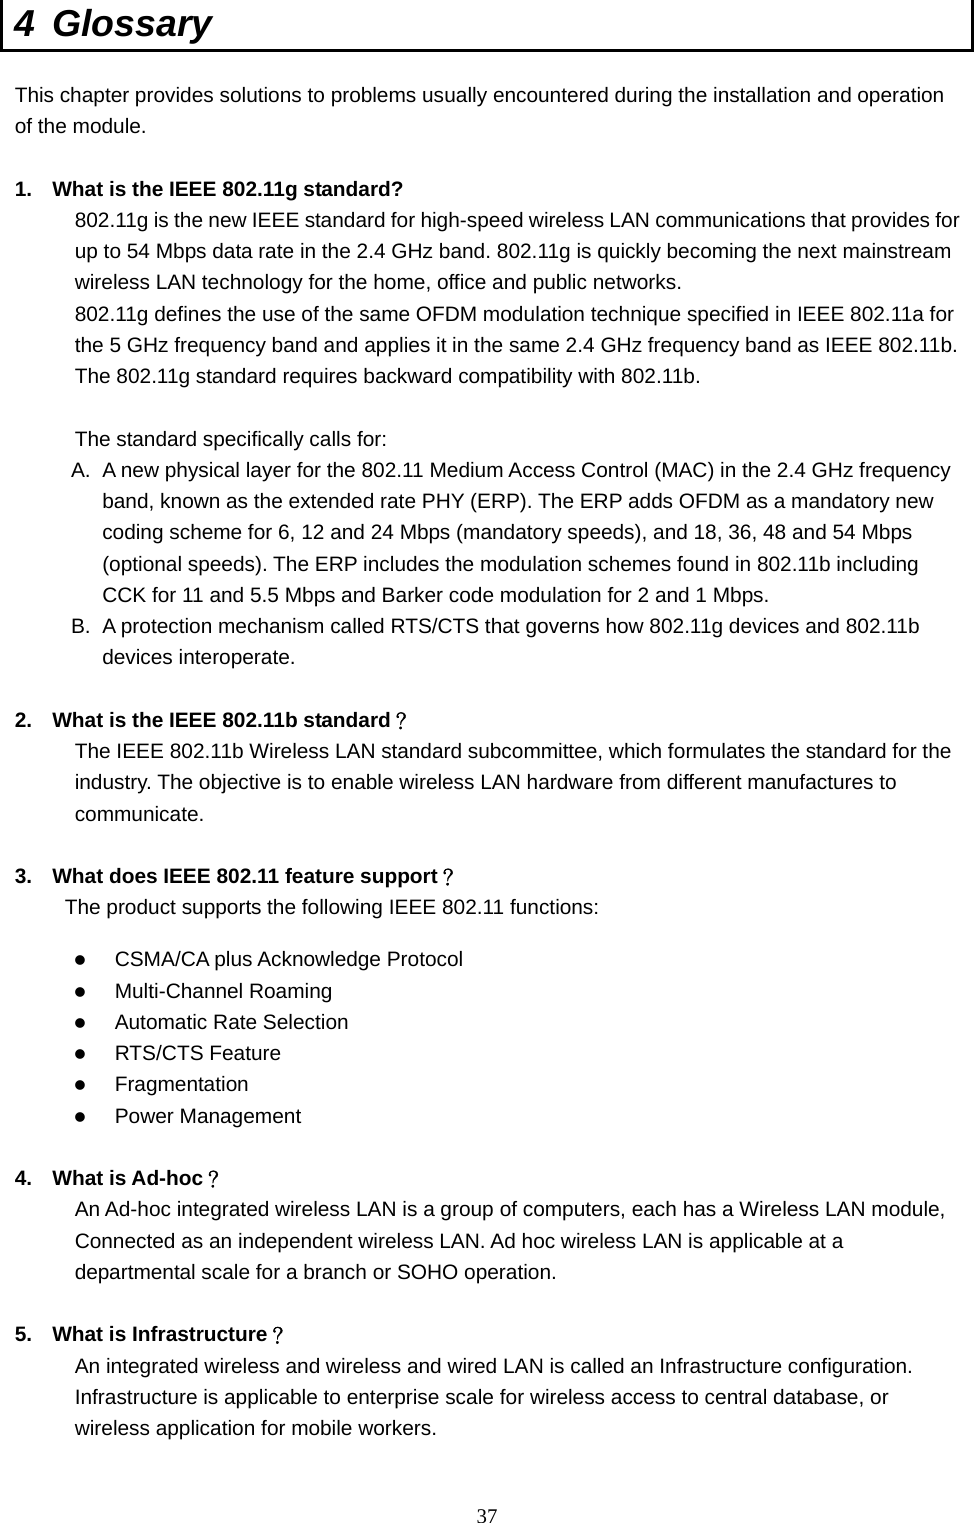  37 4 Glossary This chapter provides solutions to problems usually encountered during the installation and operation of the module.    1.  What is the IEEE 802.11g standard? 802.11g is the new IEEE standard for high-speed wireless LAN communications that provides for up to 54 Mbps data rate in the 2.4 GHz band. 802.11g is quickly becoming the next mainstream wireless LAN technology for the home, office and public networks.   802.11g defines the use of the same OFDM modulation technique specified in IEEE 802.11a for the 5 GHz frequency band and applies it in the same 2.4 GHz frequency band as IEEE 802.11b. The 802.11g standard requires backward compatibility with 802.11b.  The standard specifically calls for:   A.  A new physical layer for the 802.11 Medium Access Control (MAC) in the 2.4 GHz frequency band, known as the extended rate PHY (ERP). The ERP adds OFDM as a mandatory new coding scheme for 6, 12 and 24 Mbps (mandatory speeds), and 18, 36, 48 and 54 Mbps (optional speeds). The ERP includes the modulation schemes found in 802.11b including CCK for 11 and 5.5 Mbps and Barker code modulation for 2 and 1 Mbps. B.  A protection mechanism called RTS/CTS that governs how 802.11g devices and 802.11b devices interoperate.  2.  What is the IEEE 802.11b standard？ The IEEE 802.11b Wireless LAN standard subcommittee, which formulates the standard for the industry. The objective is to enable wireless LAN hardware from different manufactures to communicate.  3.  What does IEEE 802.11 feature support？ The product supports the following IEEE 802.11 functions: z CSMA/CA plus Acknowledge Protocol z Multi-Channel Roaming z Automatic Rate Selection z RTS/CTS Feature z Fragmentation z Power Management  4. What is Ad-hoc？ An Ad-hoc integrated wireless LAN is a group of computers, each has a Wireless LAN module, Connected as an independent wireless LAN. Ad hoc wireless LAN is applicable at a departmental scale for a branch or SOHO operation.  5.  What is Infrastructure？ An integrated wireless and wireless and wired LAN is called an Infrastructure configuration. Infrastructure is applicable to enterprise scale for wireless access to central database, or wireless application for mobile workers.  